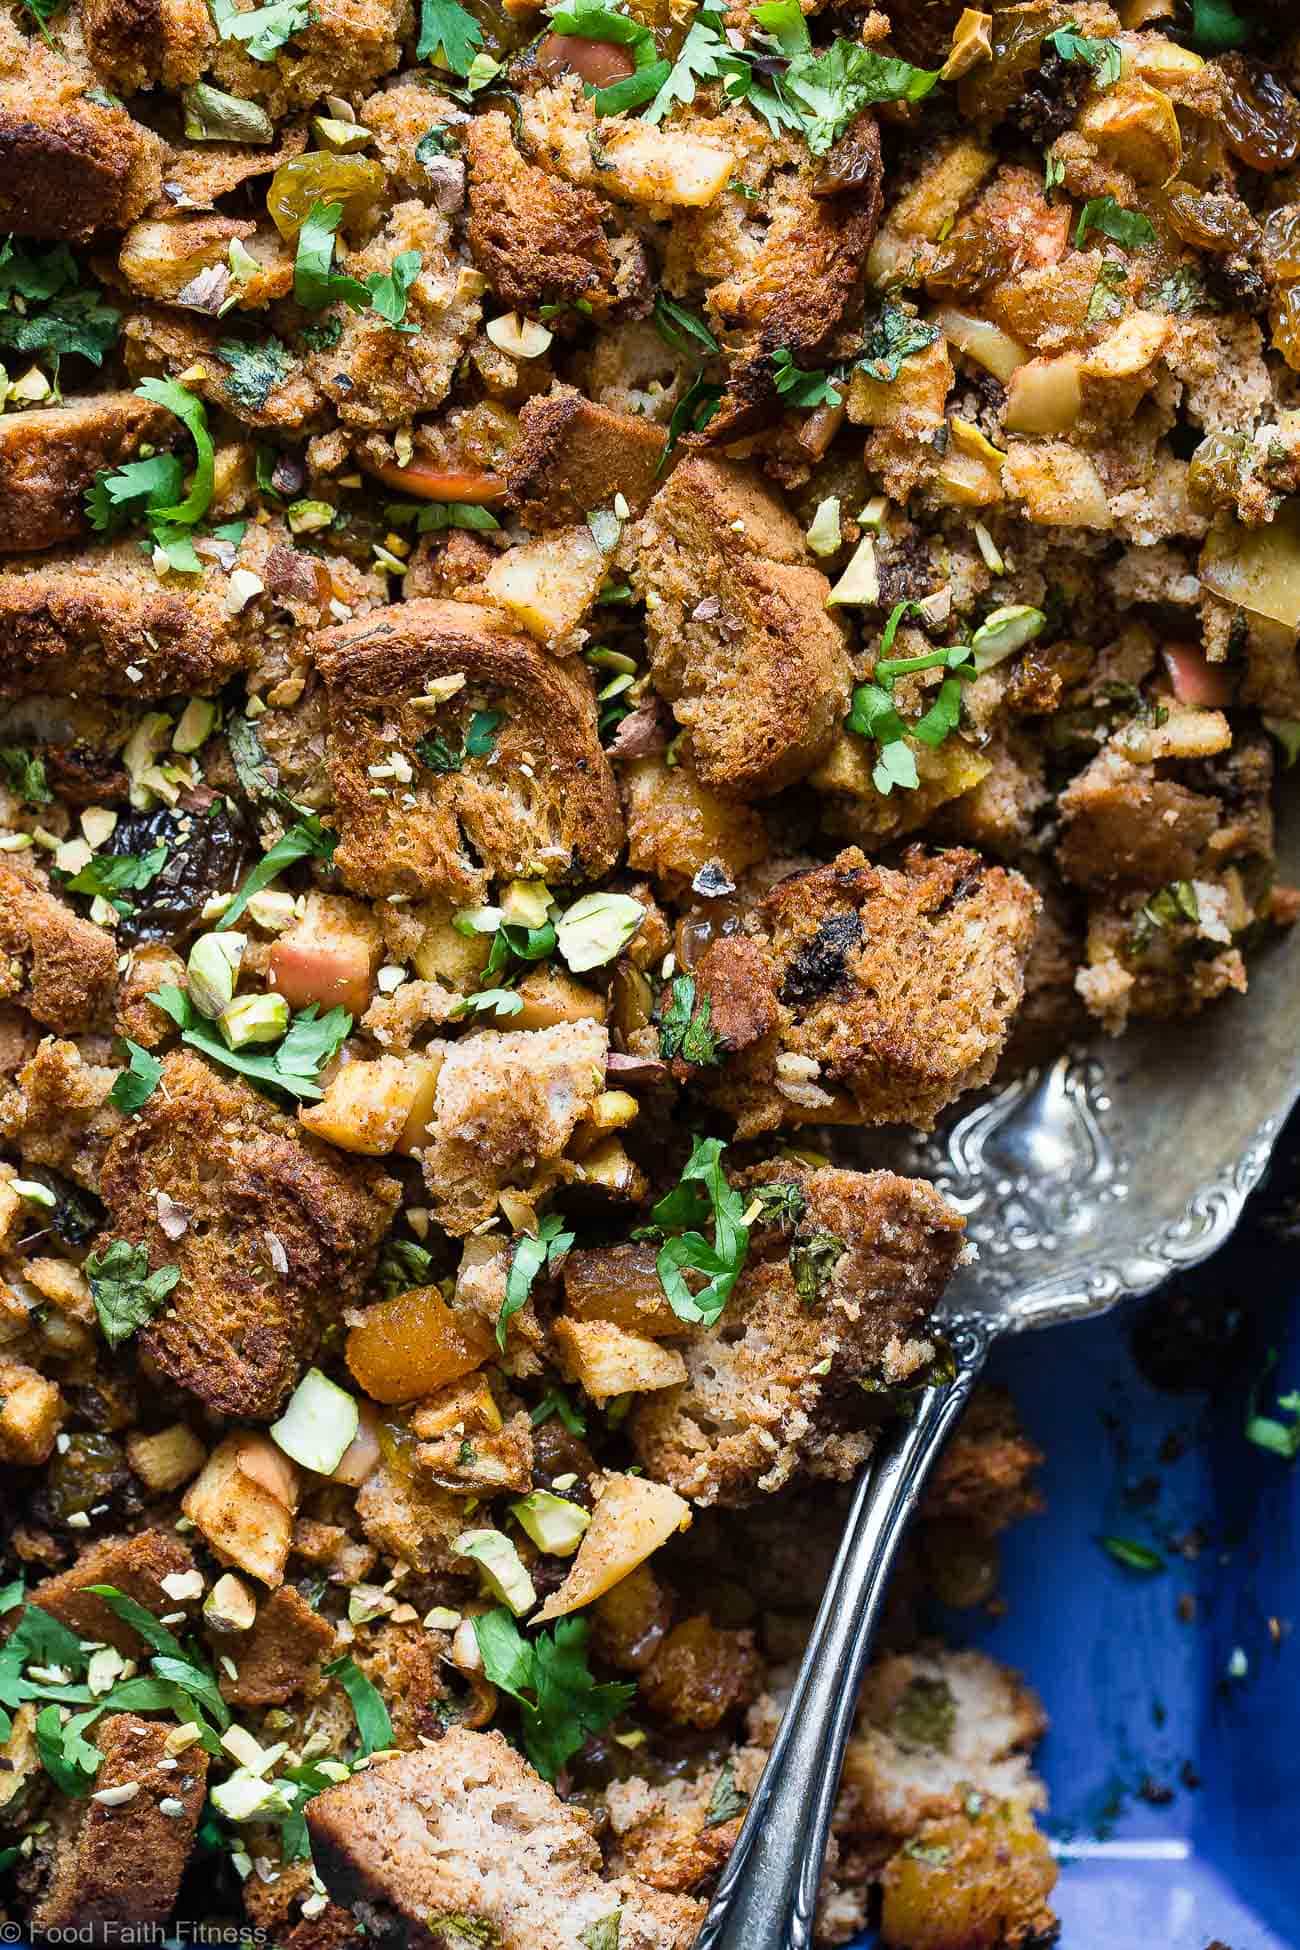 Moroccan Gluten Free Stuffing  -  This is the best gluten free stuffing! Made with spicy-sweet Moroccan flavors, apples and dried fruit! It's a healthy, dairy-free twist on a classic side dish that's perfect for Thanksgiving! | Foodfaithfitness.com | @FoodFaithFit